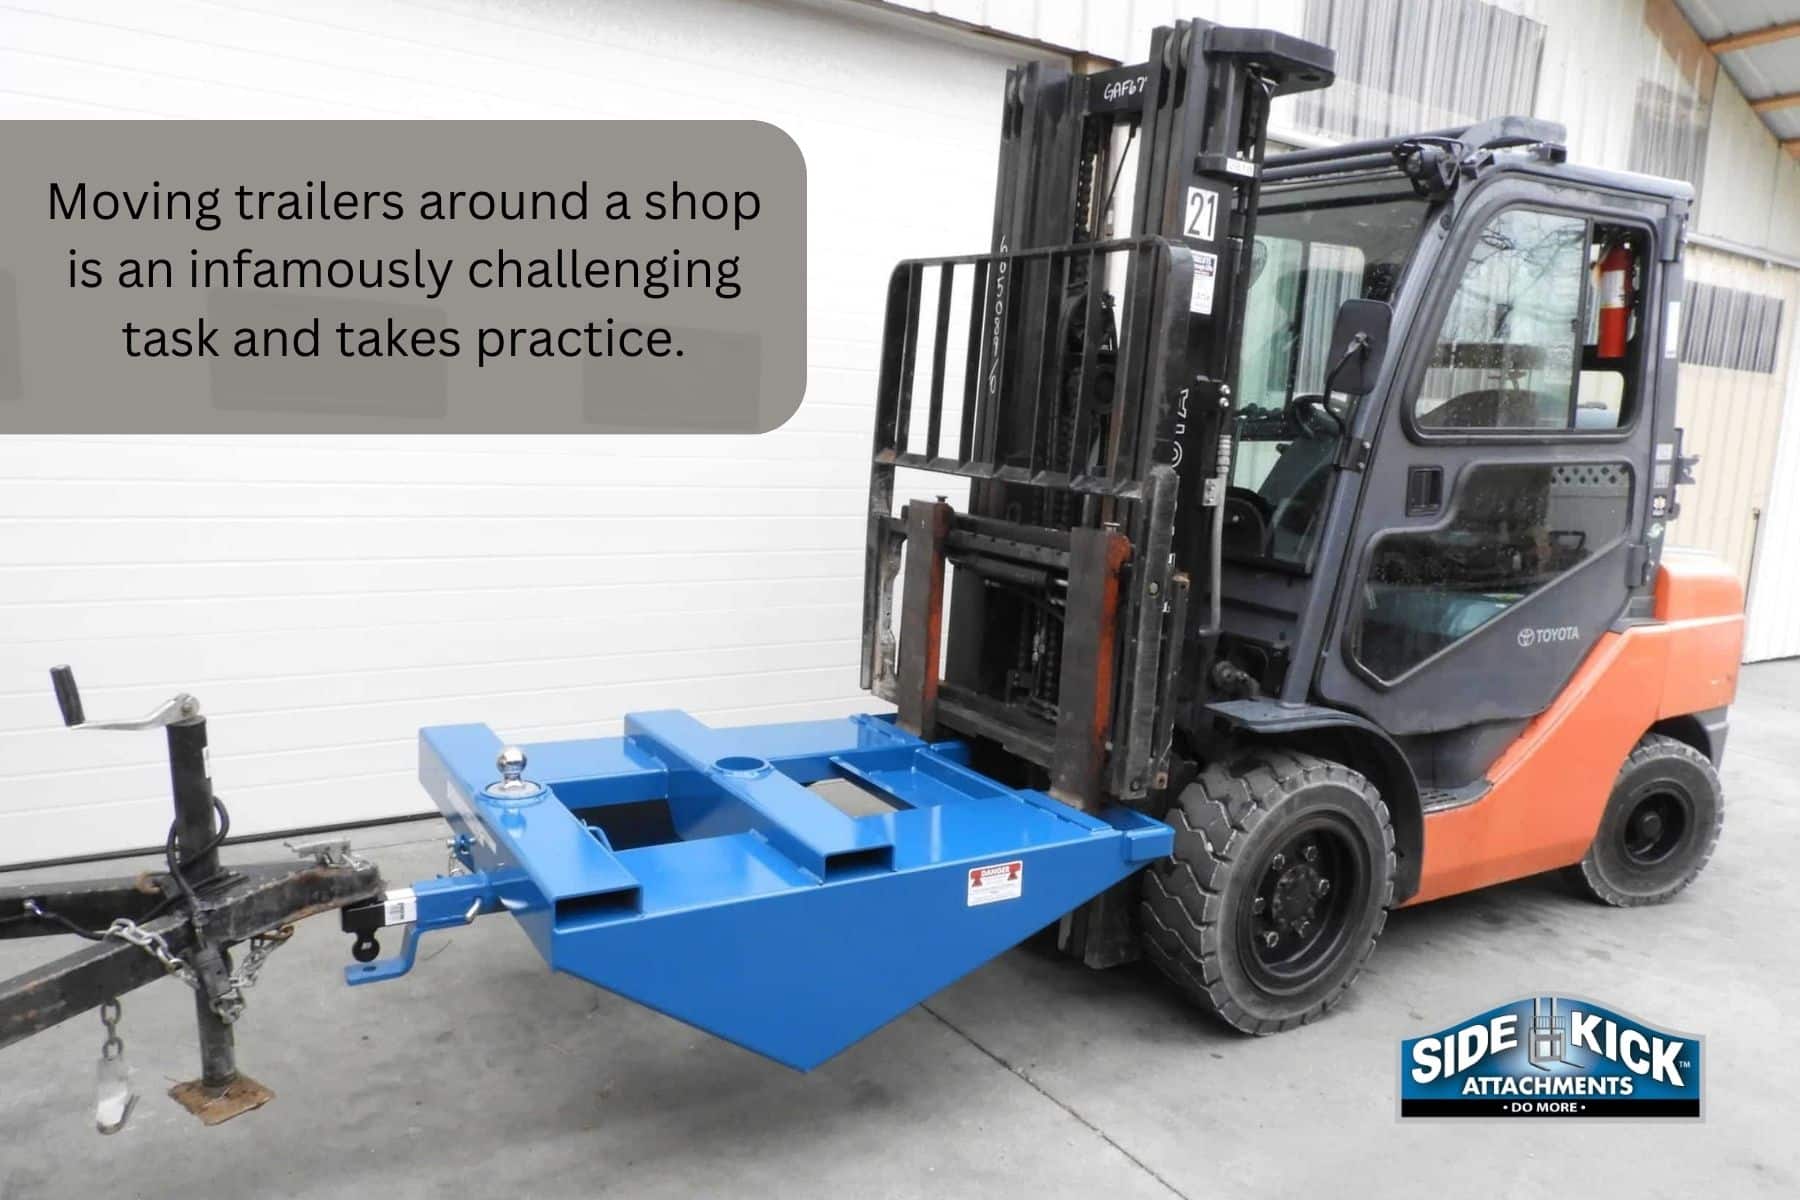 A forklift trailer mover makes moving trailers around a ship much easier